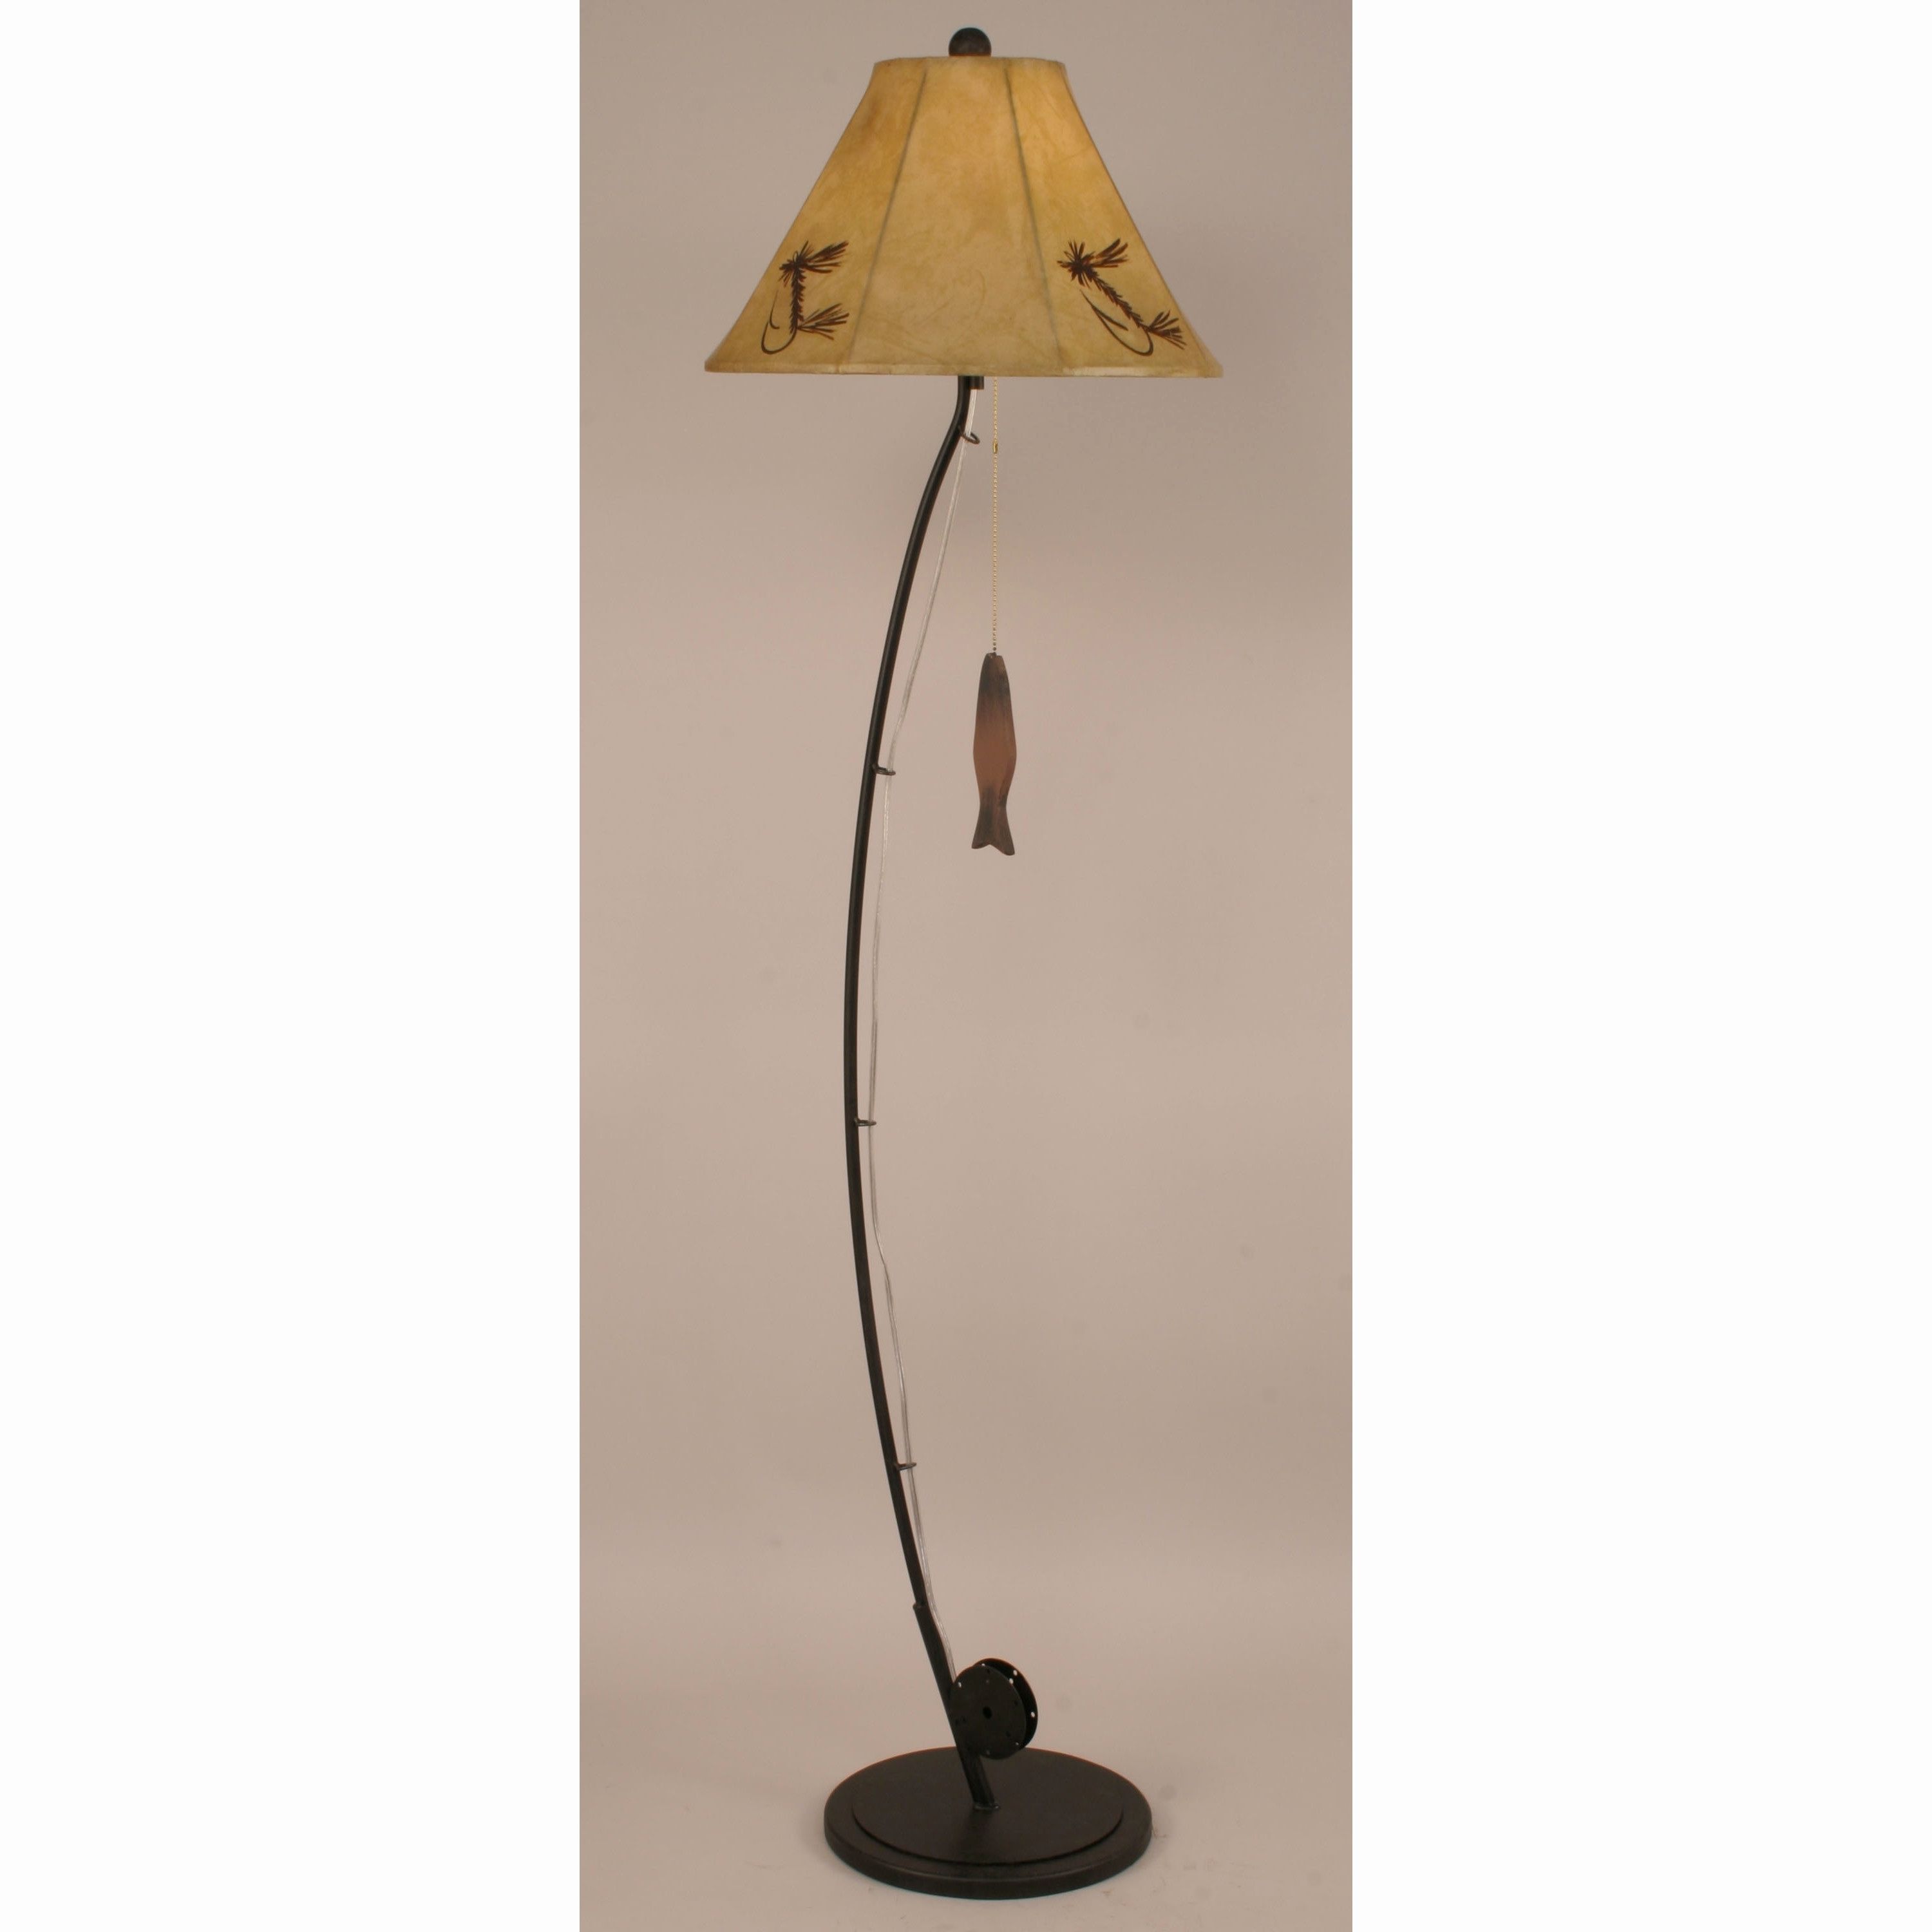 Popular Western Table Lamps For Living Room Intended For Top 52 Wonderful Contemporary Floor Lamps Western Table Industrial (View 6 of 20)